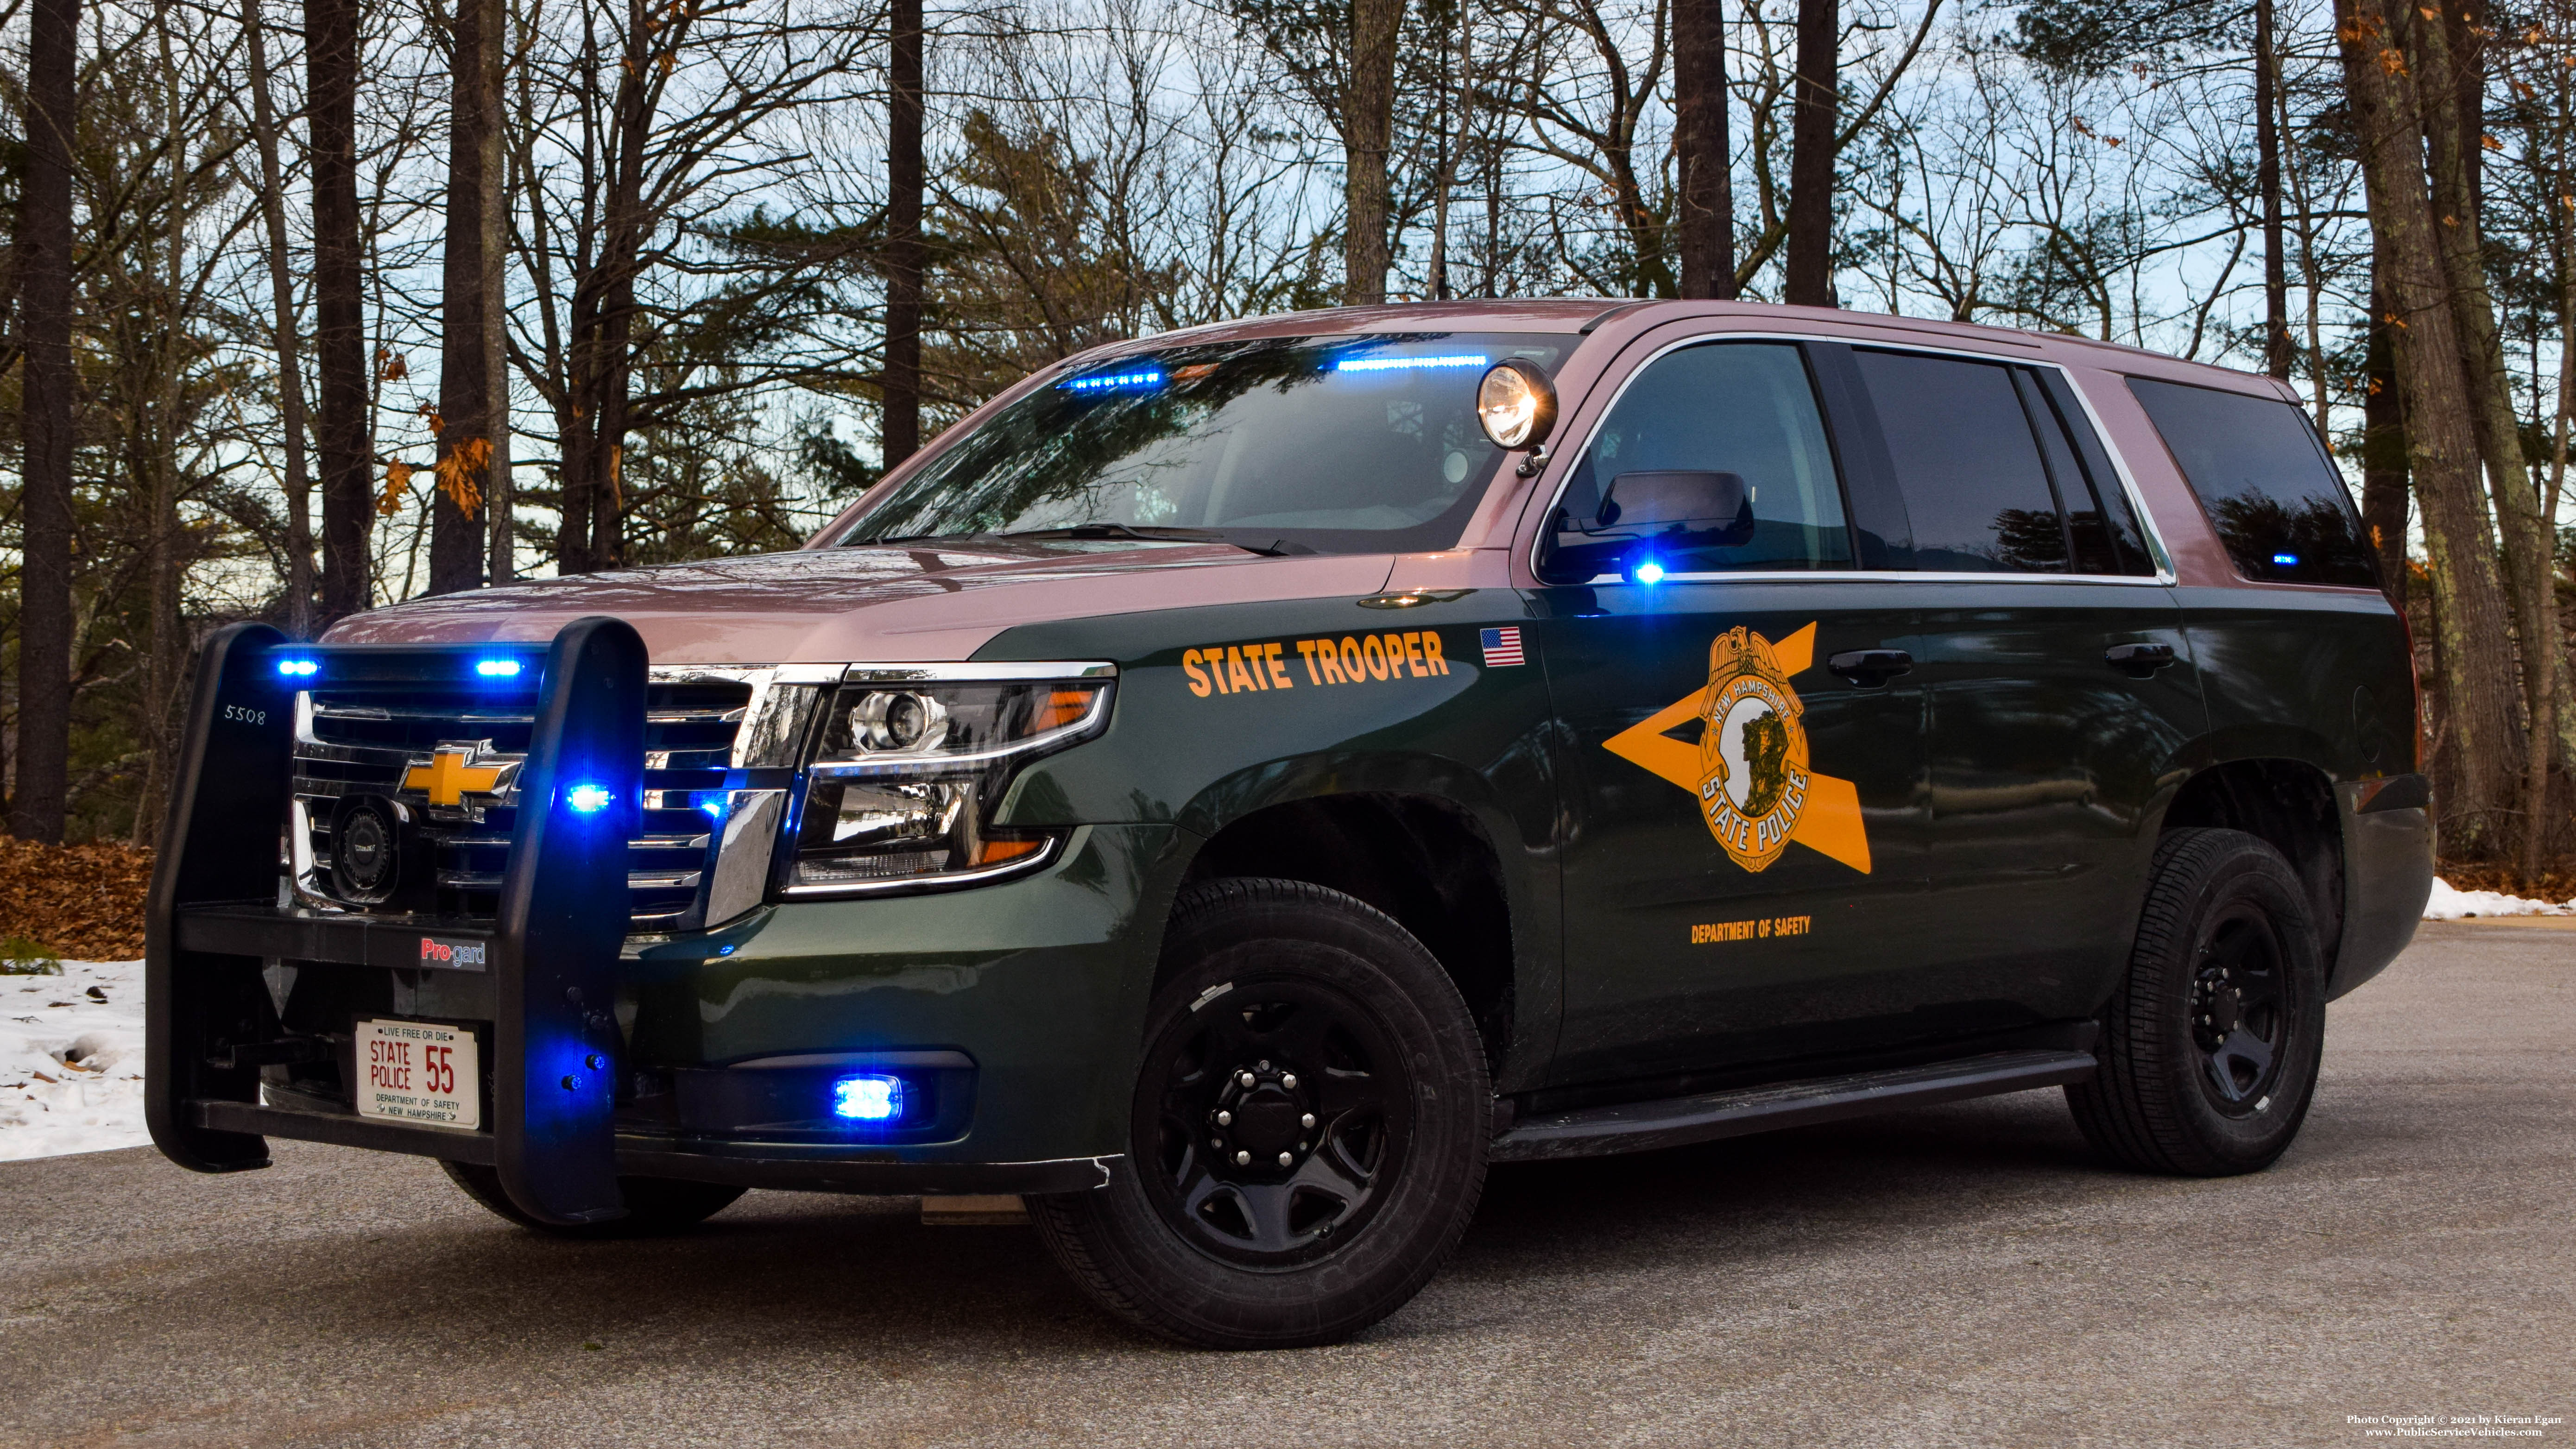 A photo  of New Hampshire State Police
            Cruiser 55, a 2020 Chevrolet Tahoe             taken by Kieran Egan